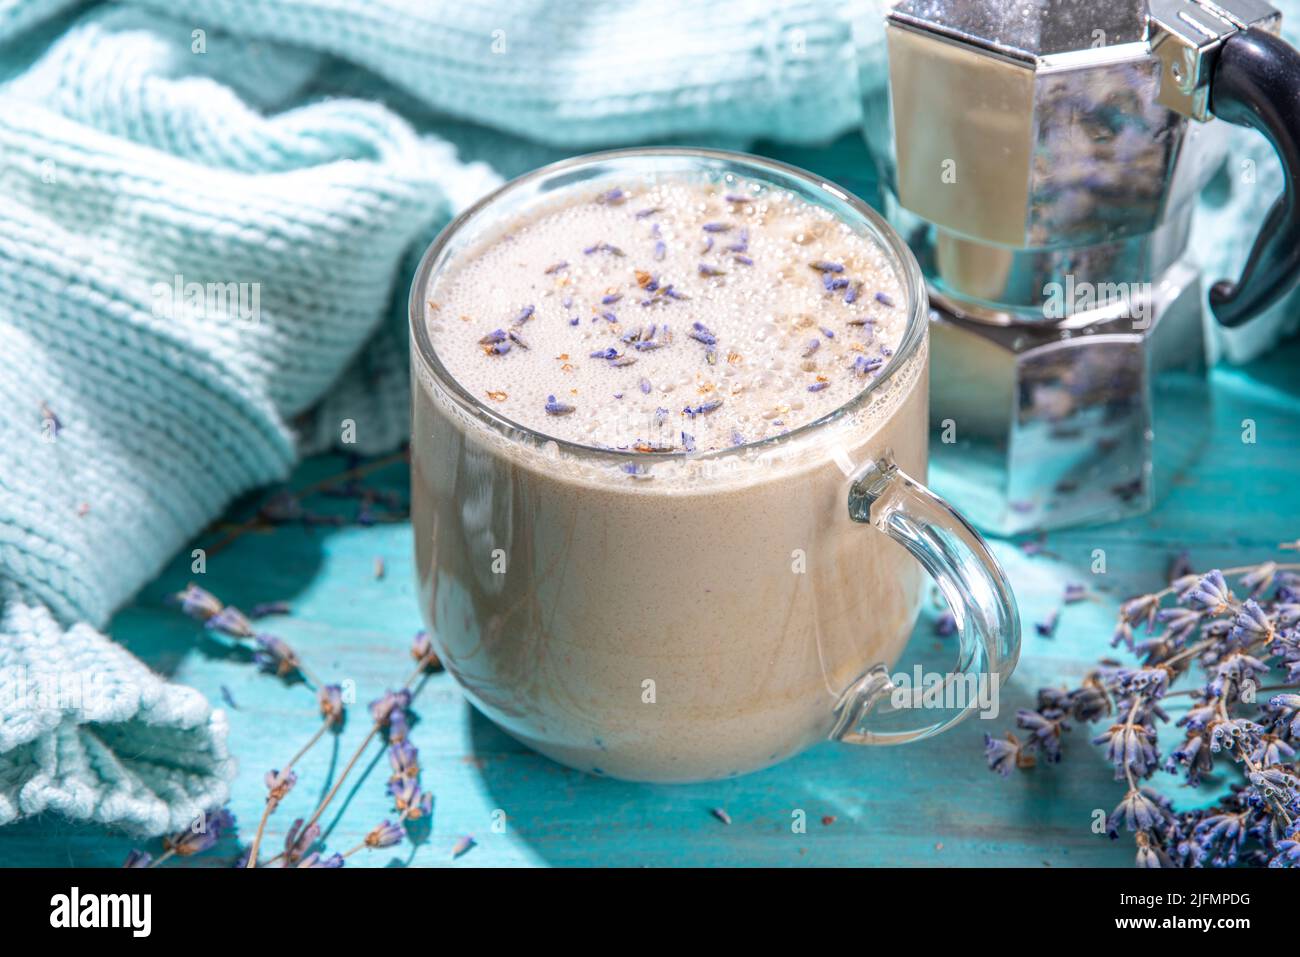 https://c8.alamy.com/comp/2JFMPDG/cup-of-cappuccino-raf-coffee-with-lavender-syrup-aromatic-lavandula-infused-latte-coffee-hot-drink-on-blue-wood-table-copy-space-2JFMPDG.jpg